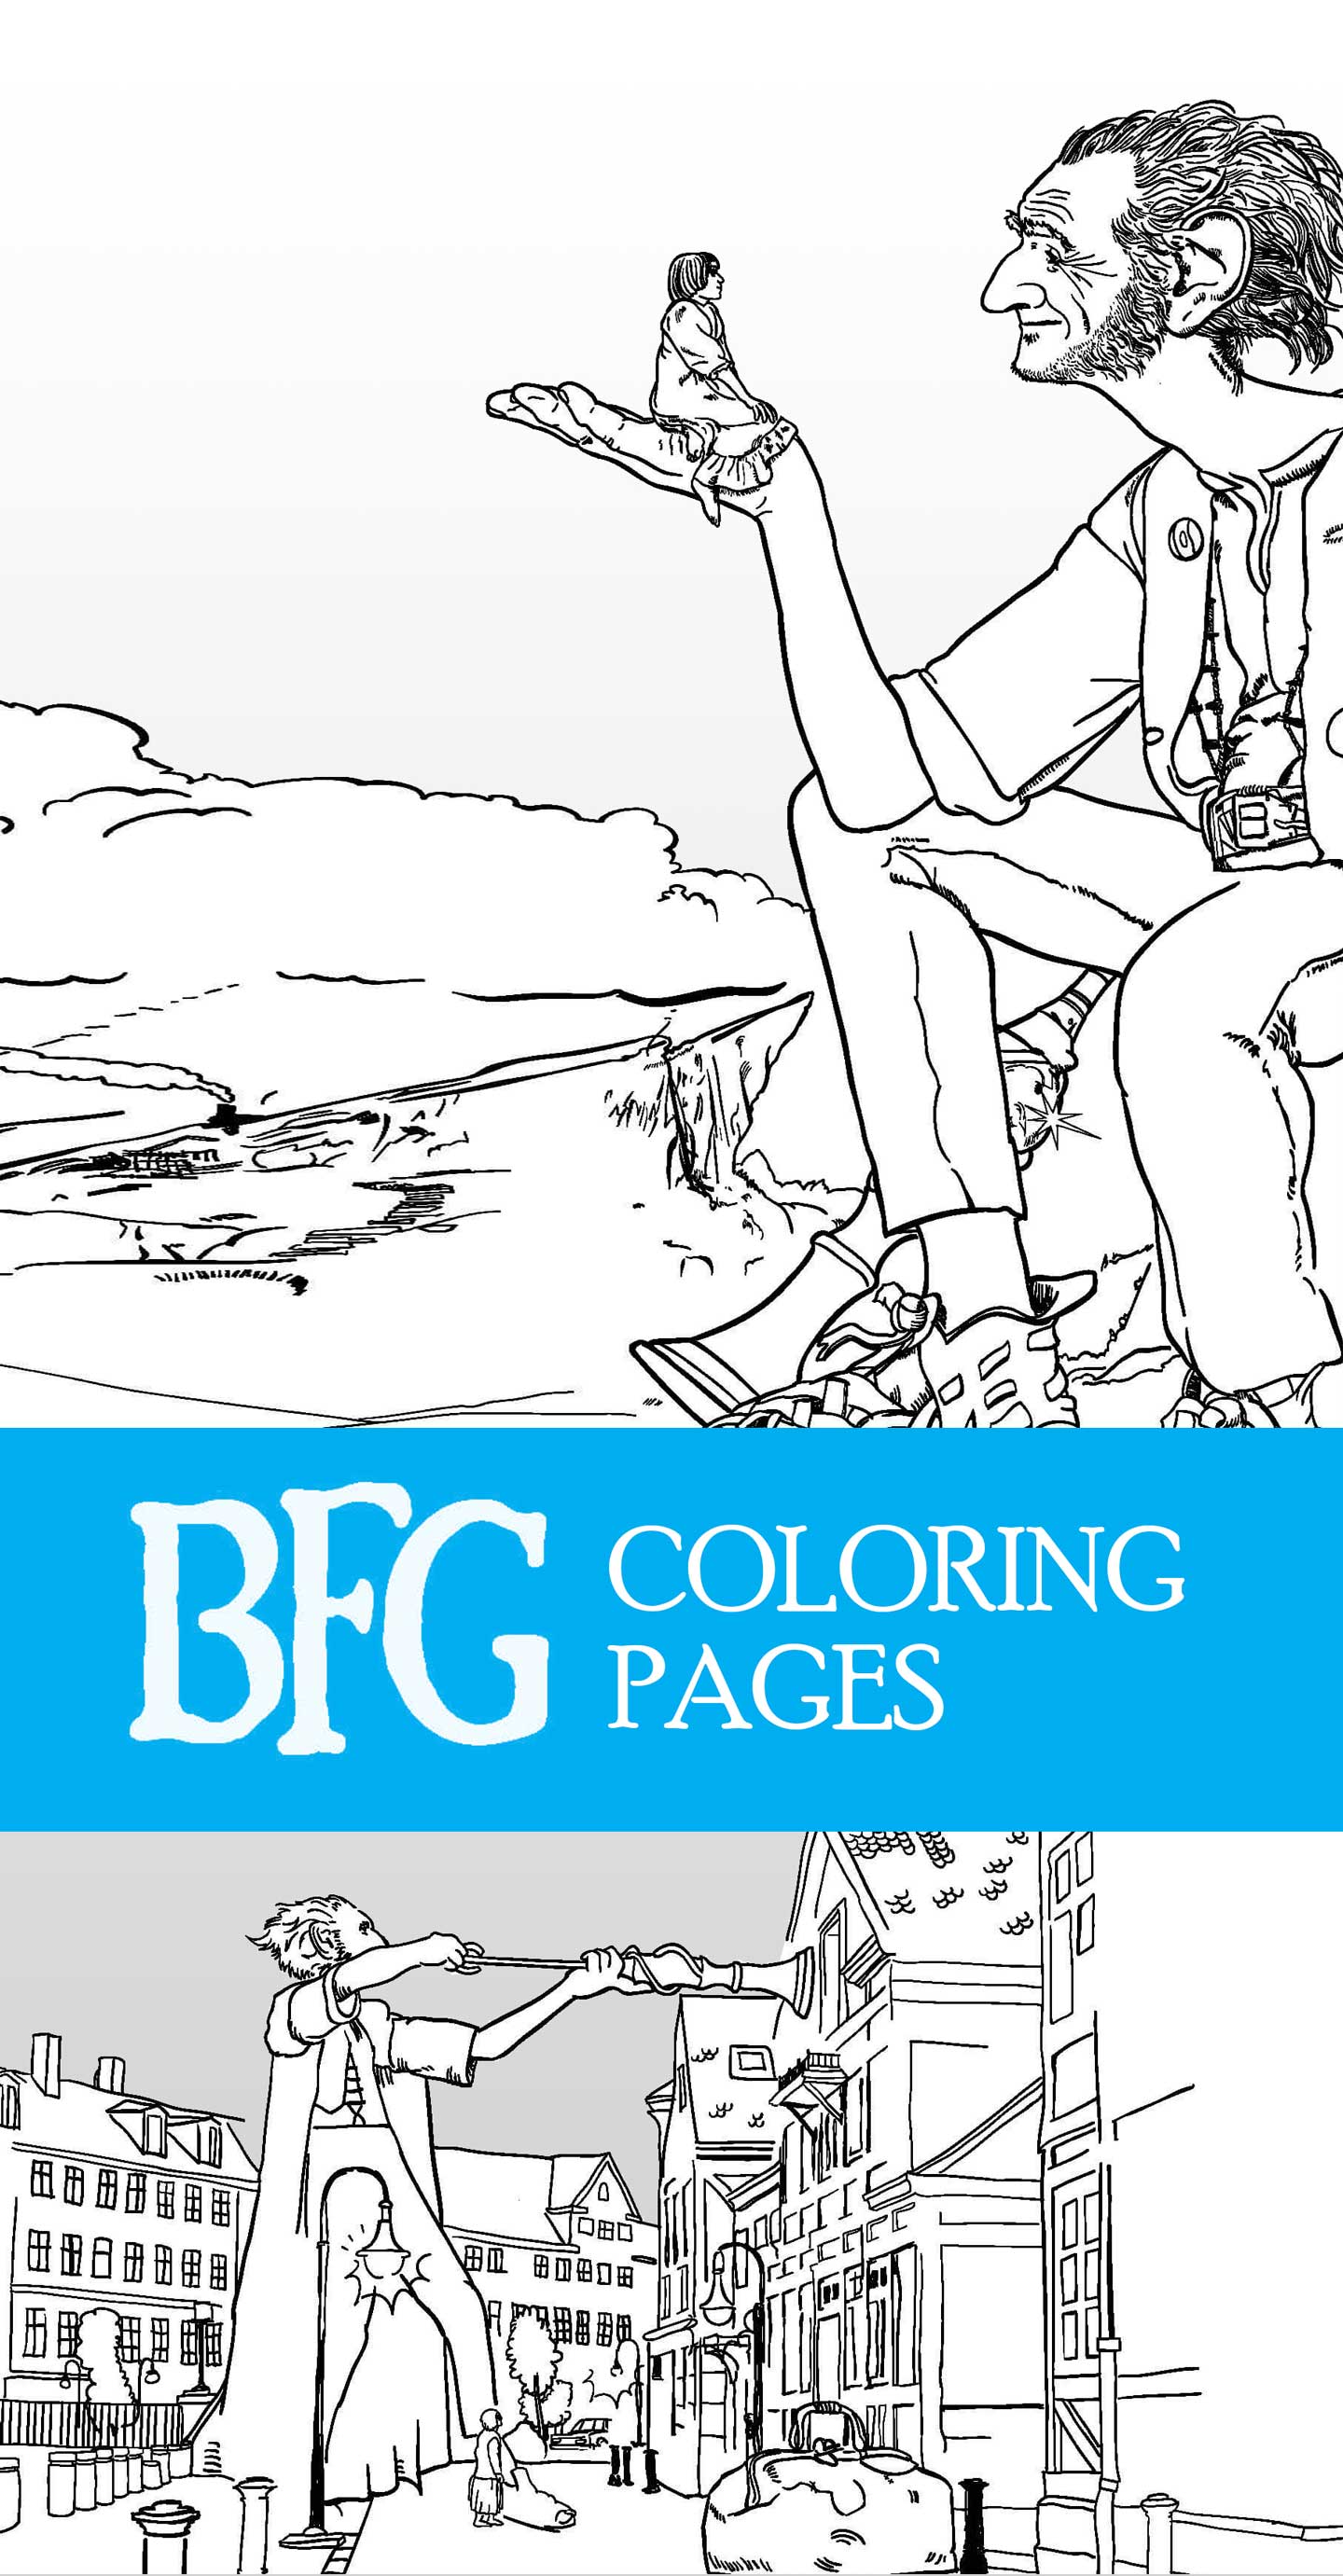 the-bfg-coloring-pages-and-free-printable-activity-sheets